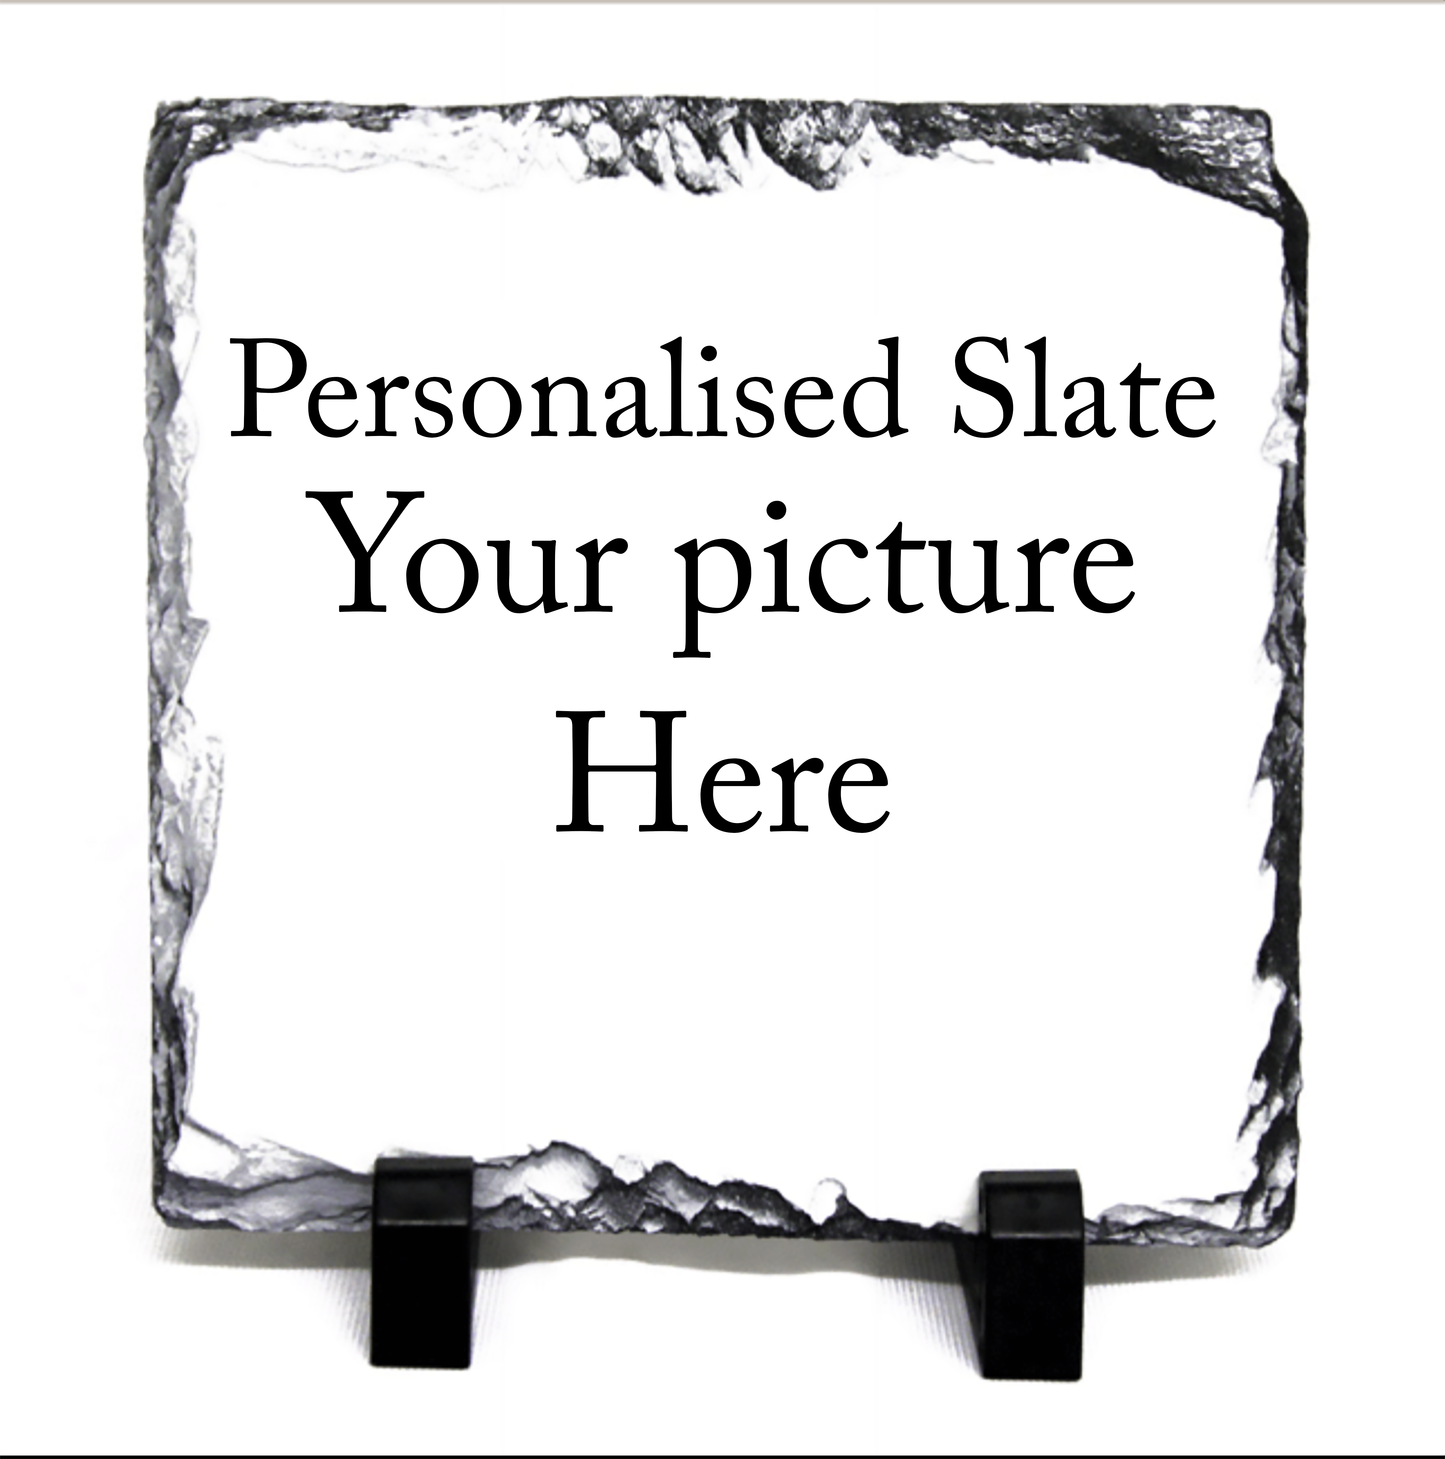 Personalised slate with stand, cutom rock slate with your image and text.